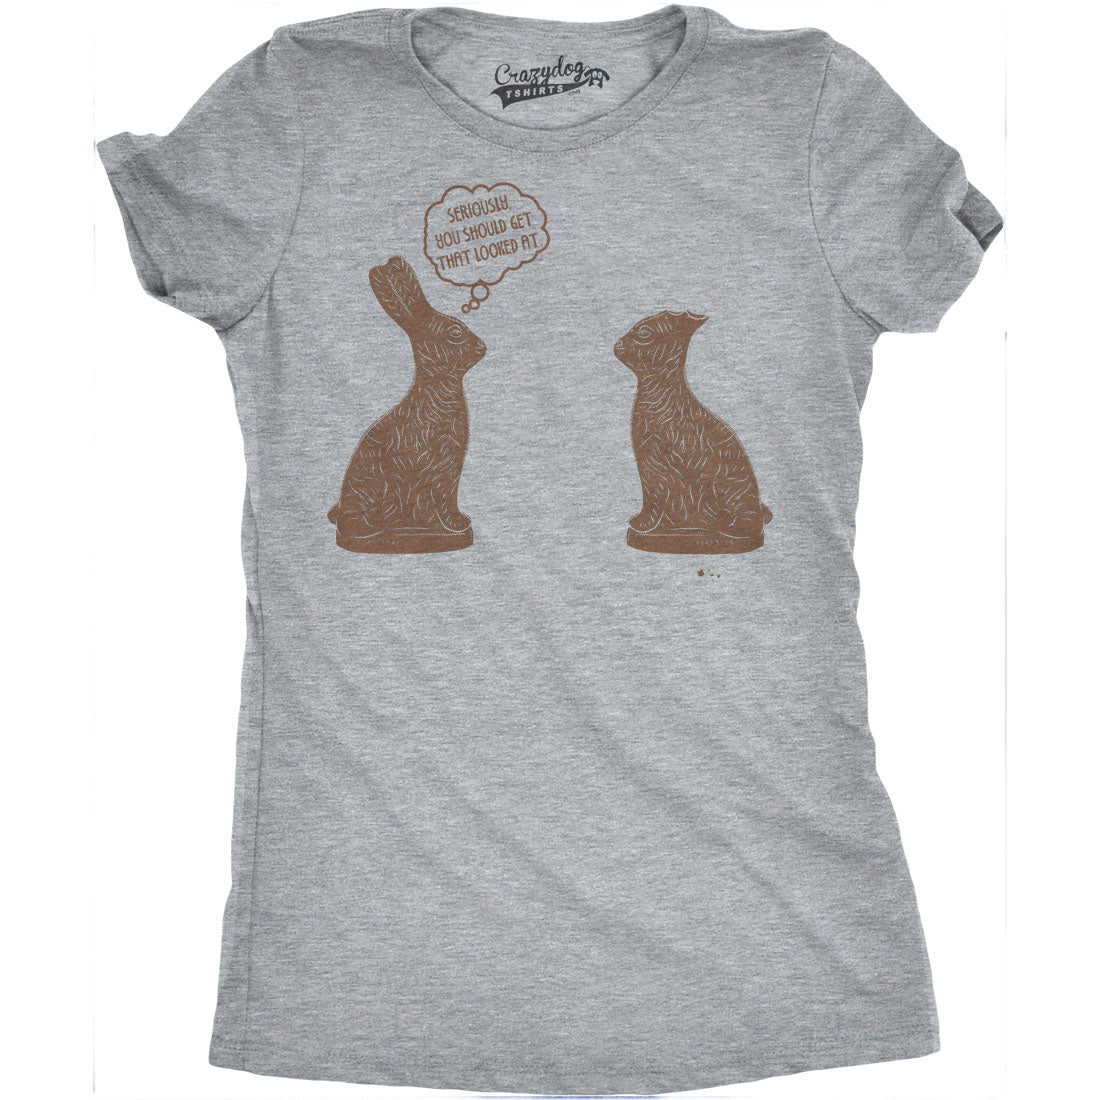 Funny Light Heather Grey You Should Get That Looked At Womens T Shirt Nerdy Easter Tee